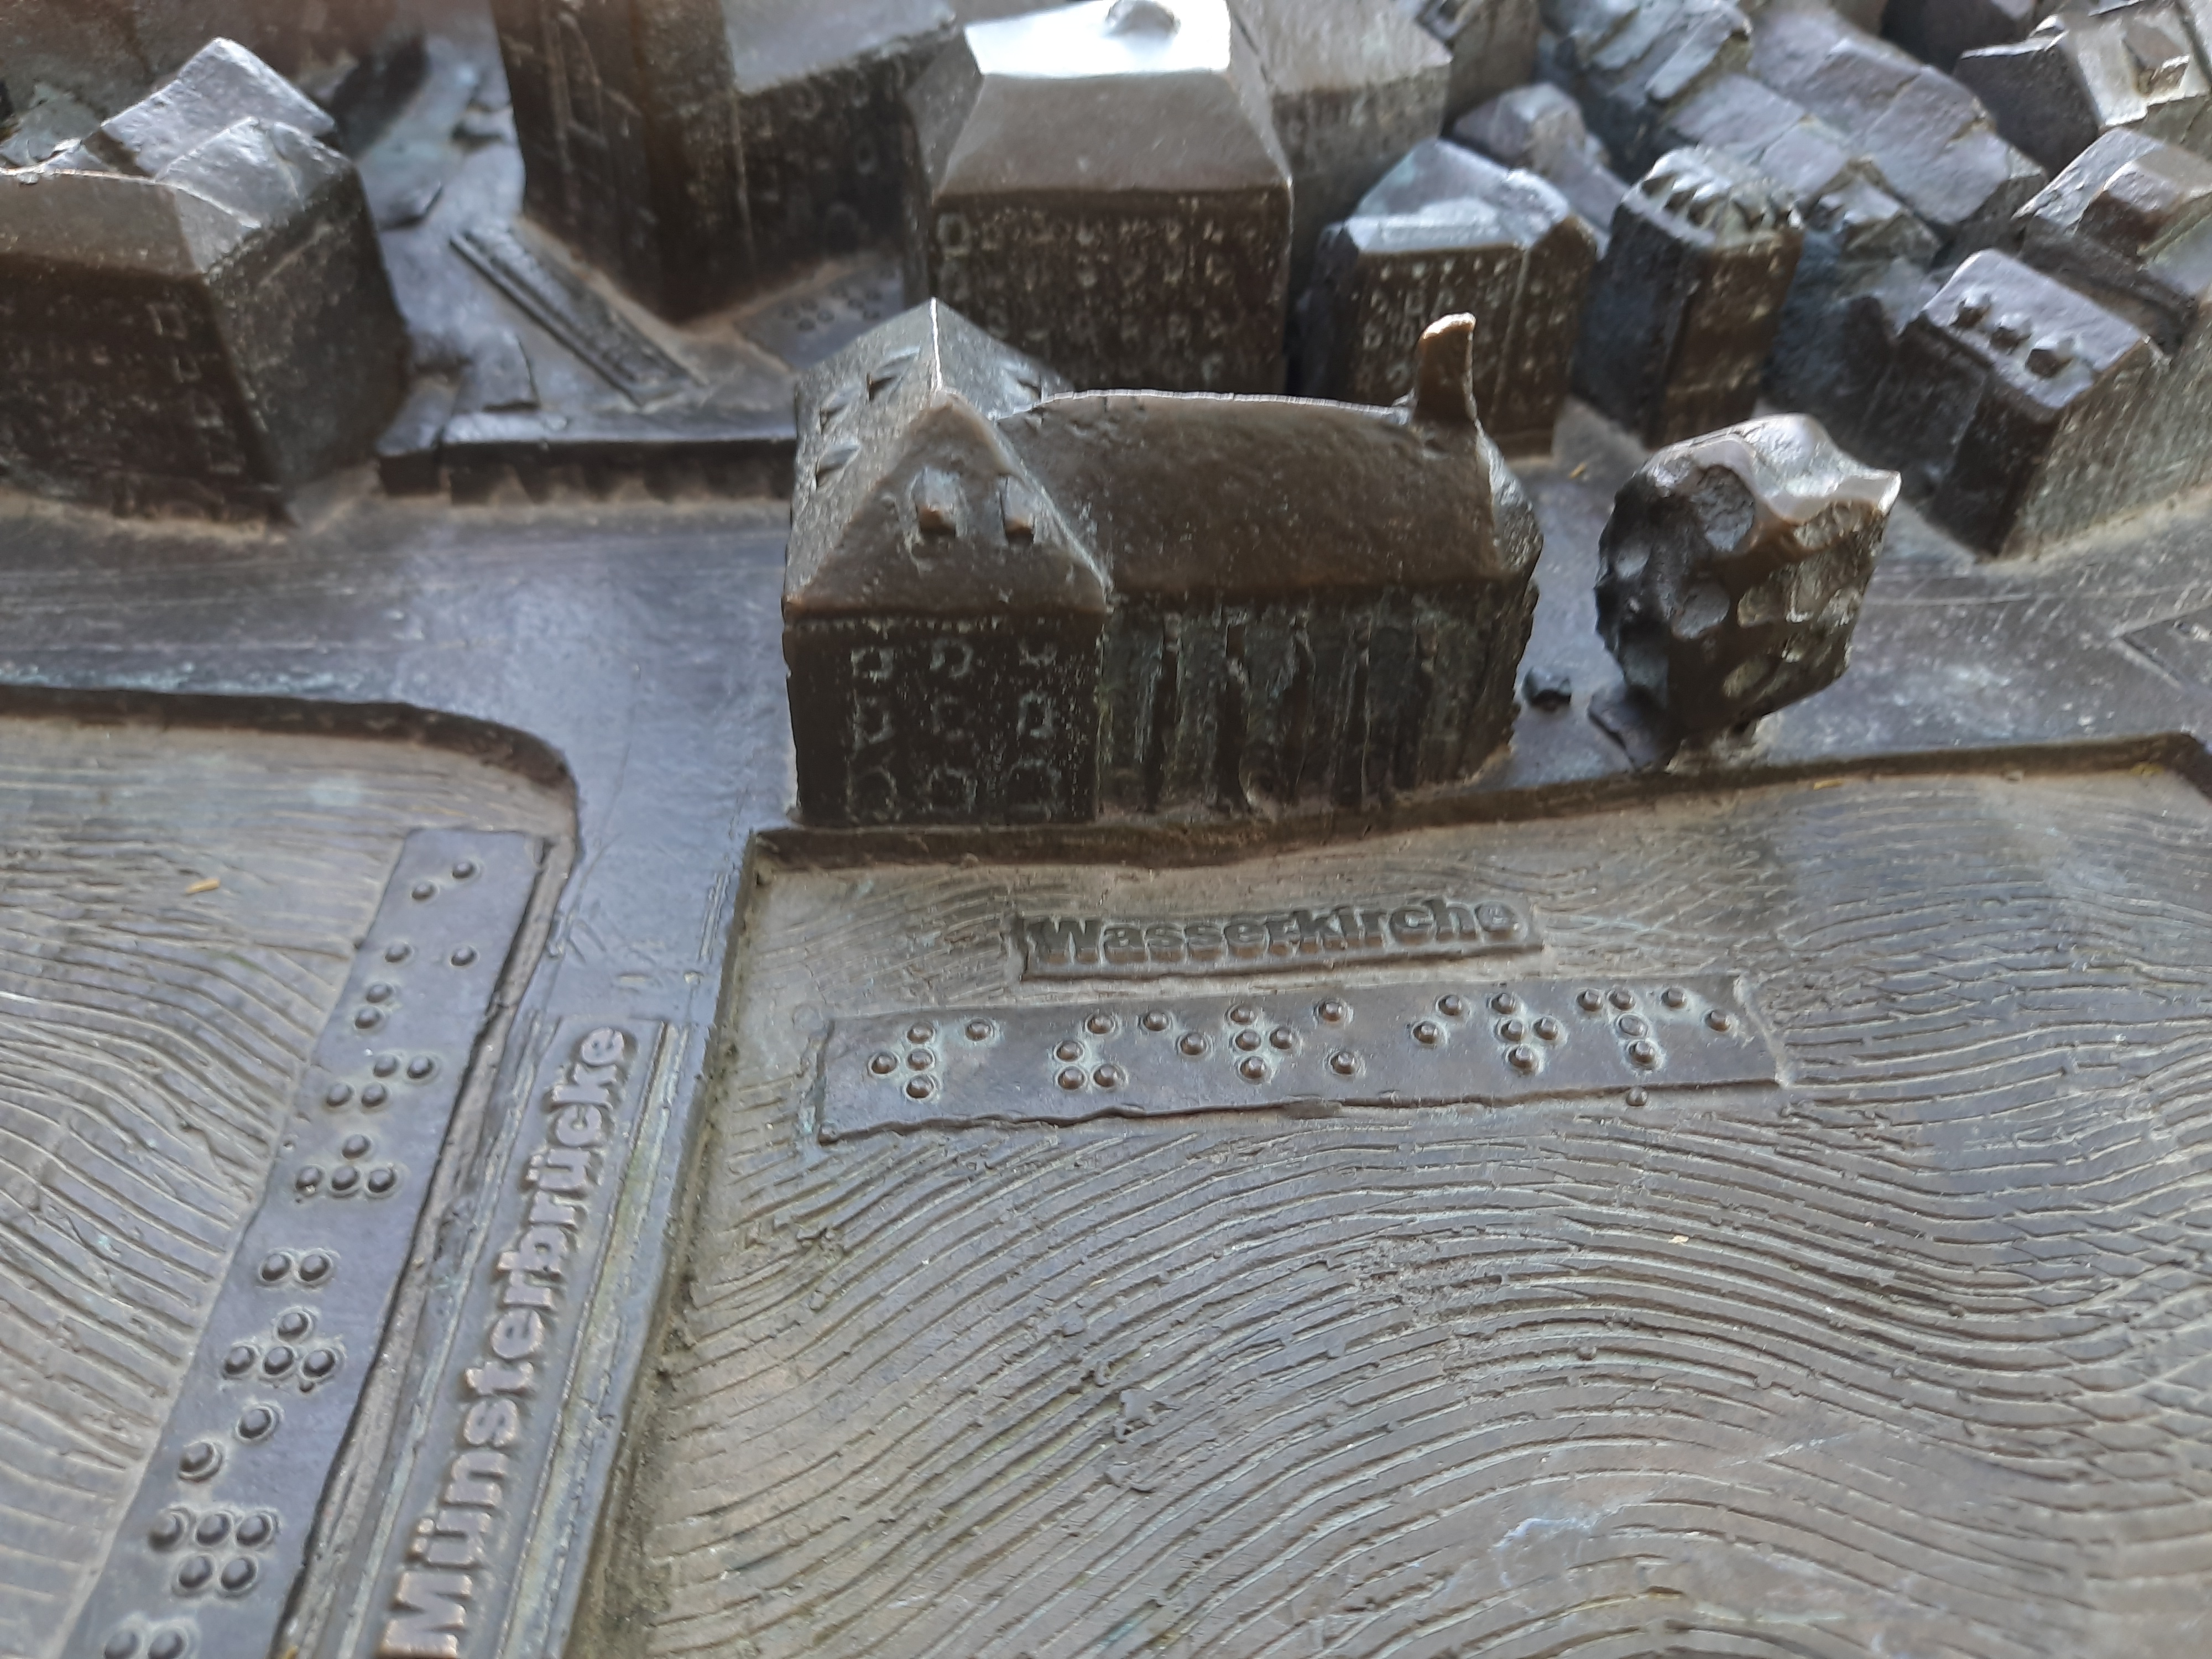 A section of a metallic replica of Zurich with braille